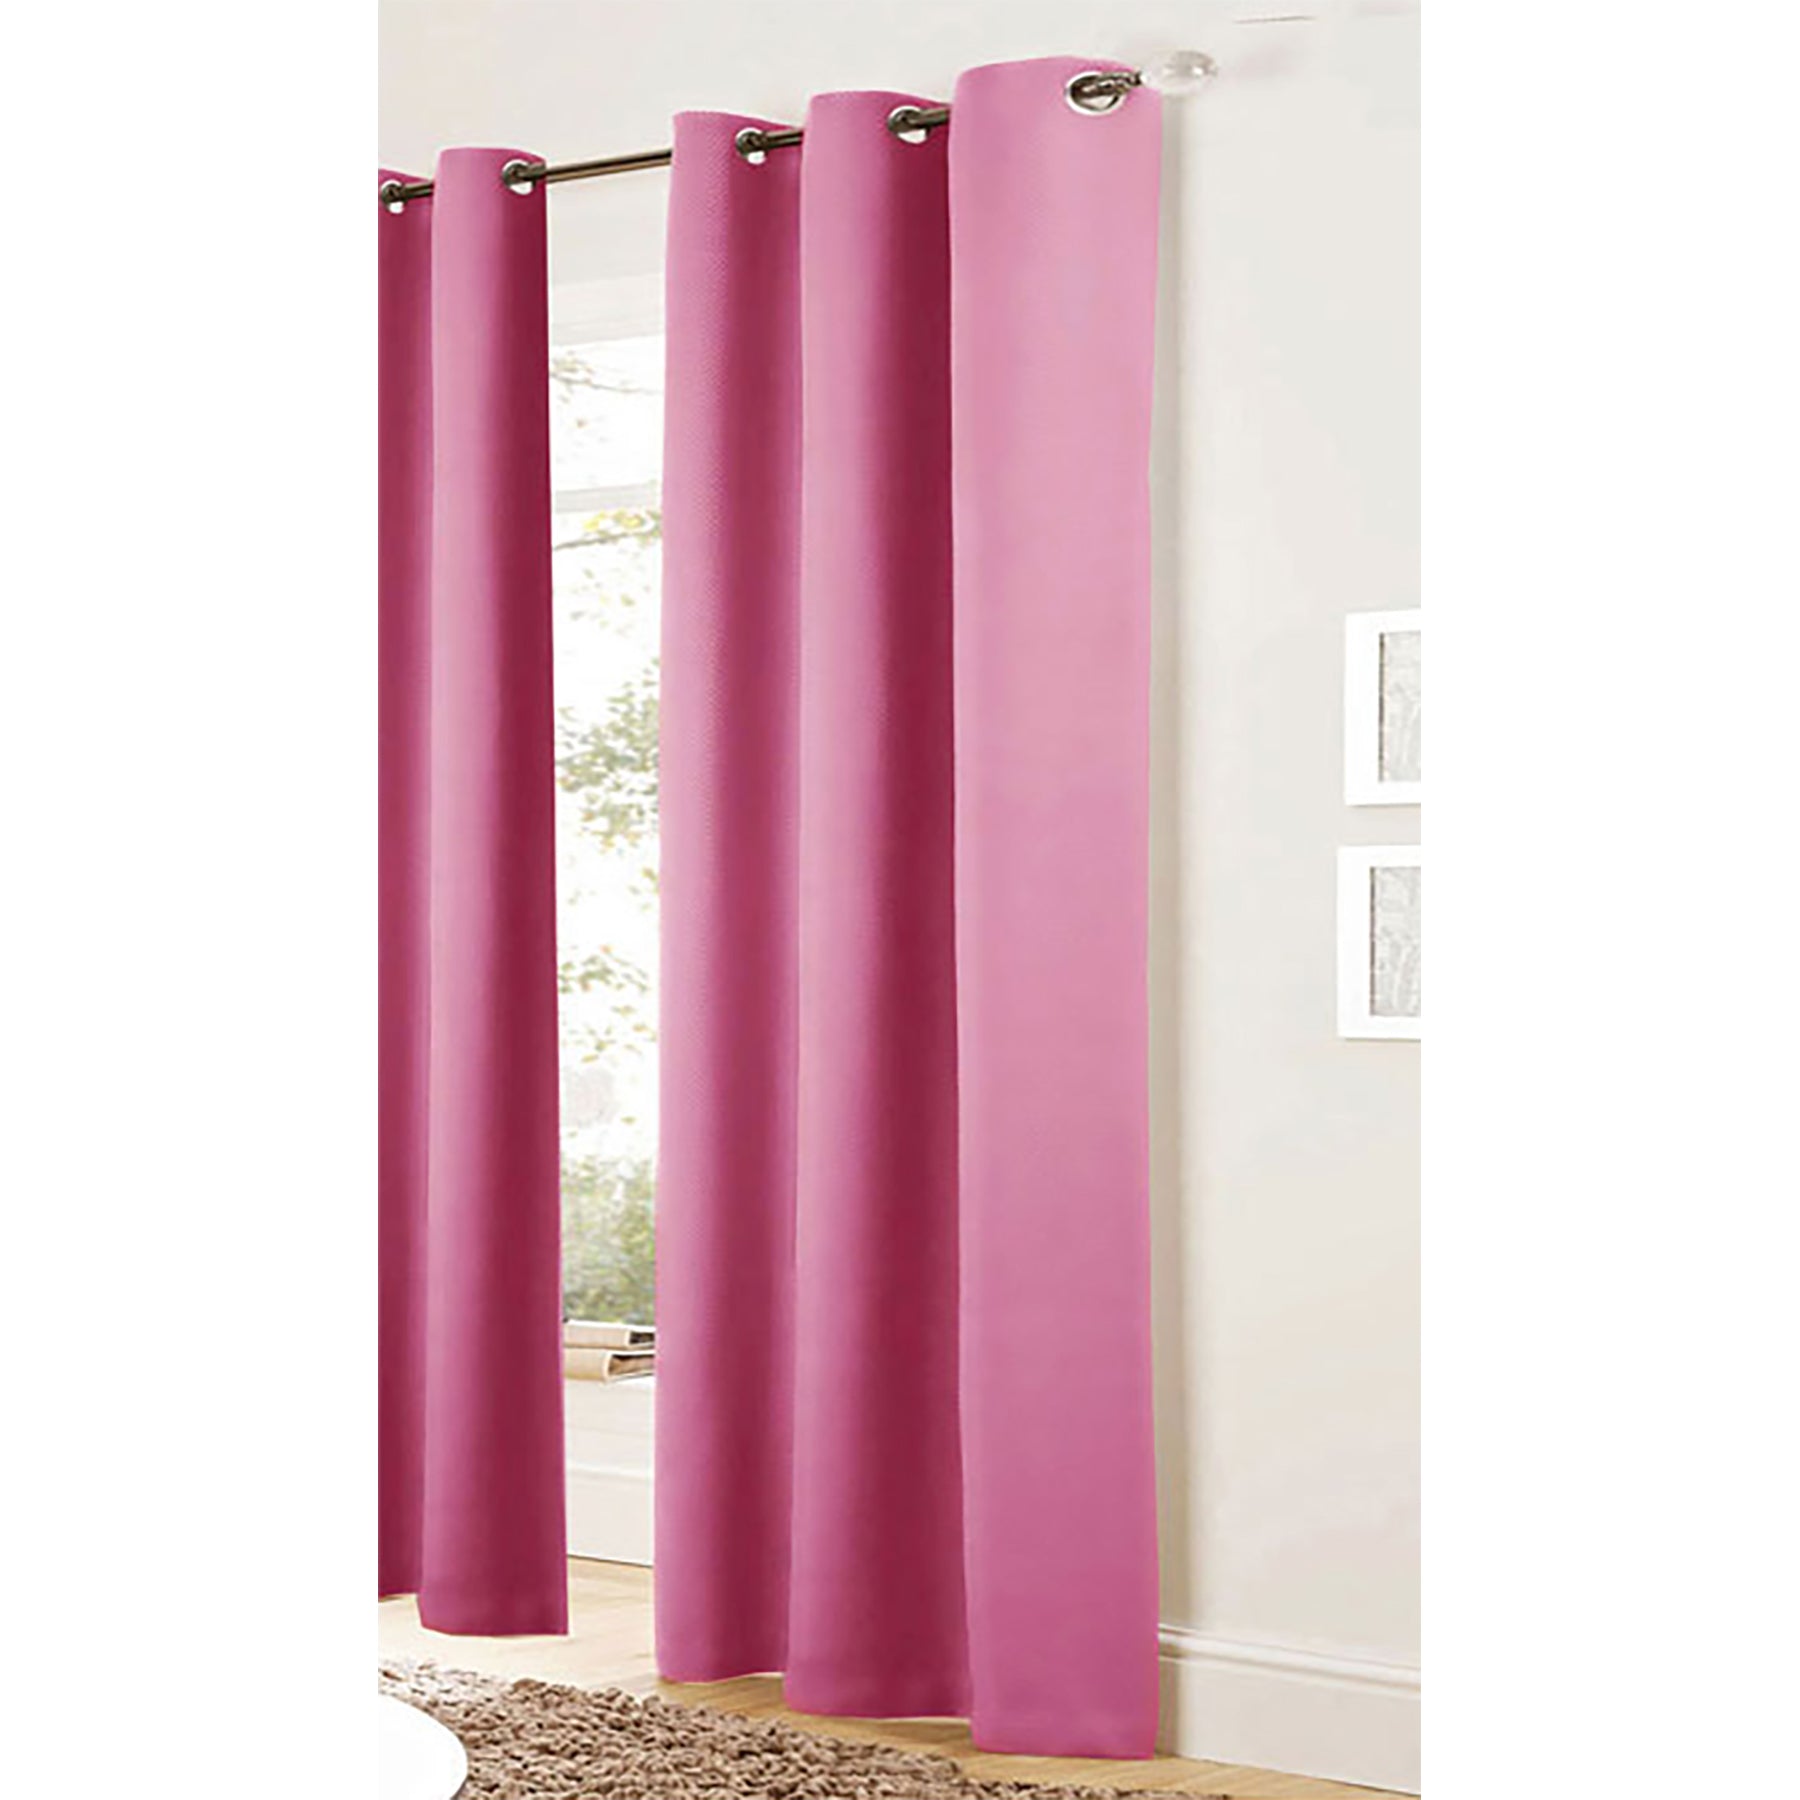 Bloomington Pair of Easy Care Eyelet Curtains Pink 120 x 221 cm - SILBERSHELL